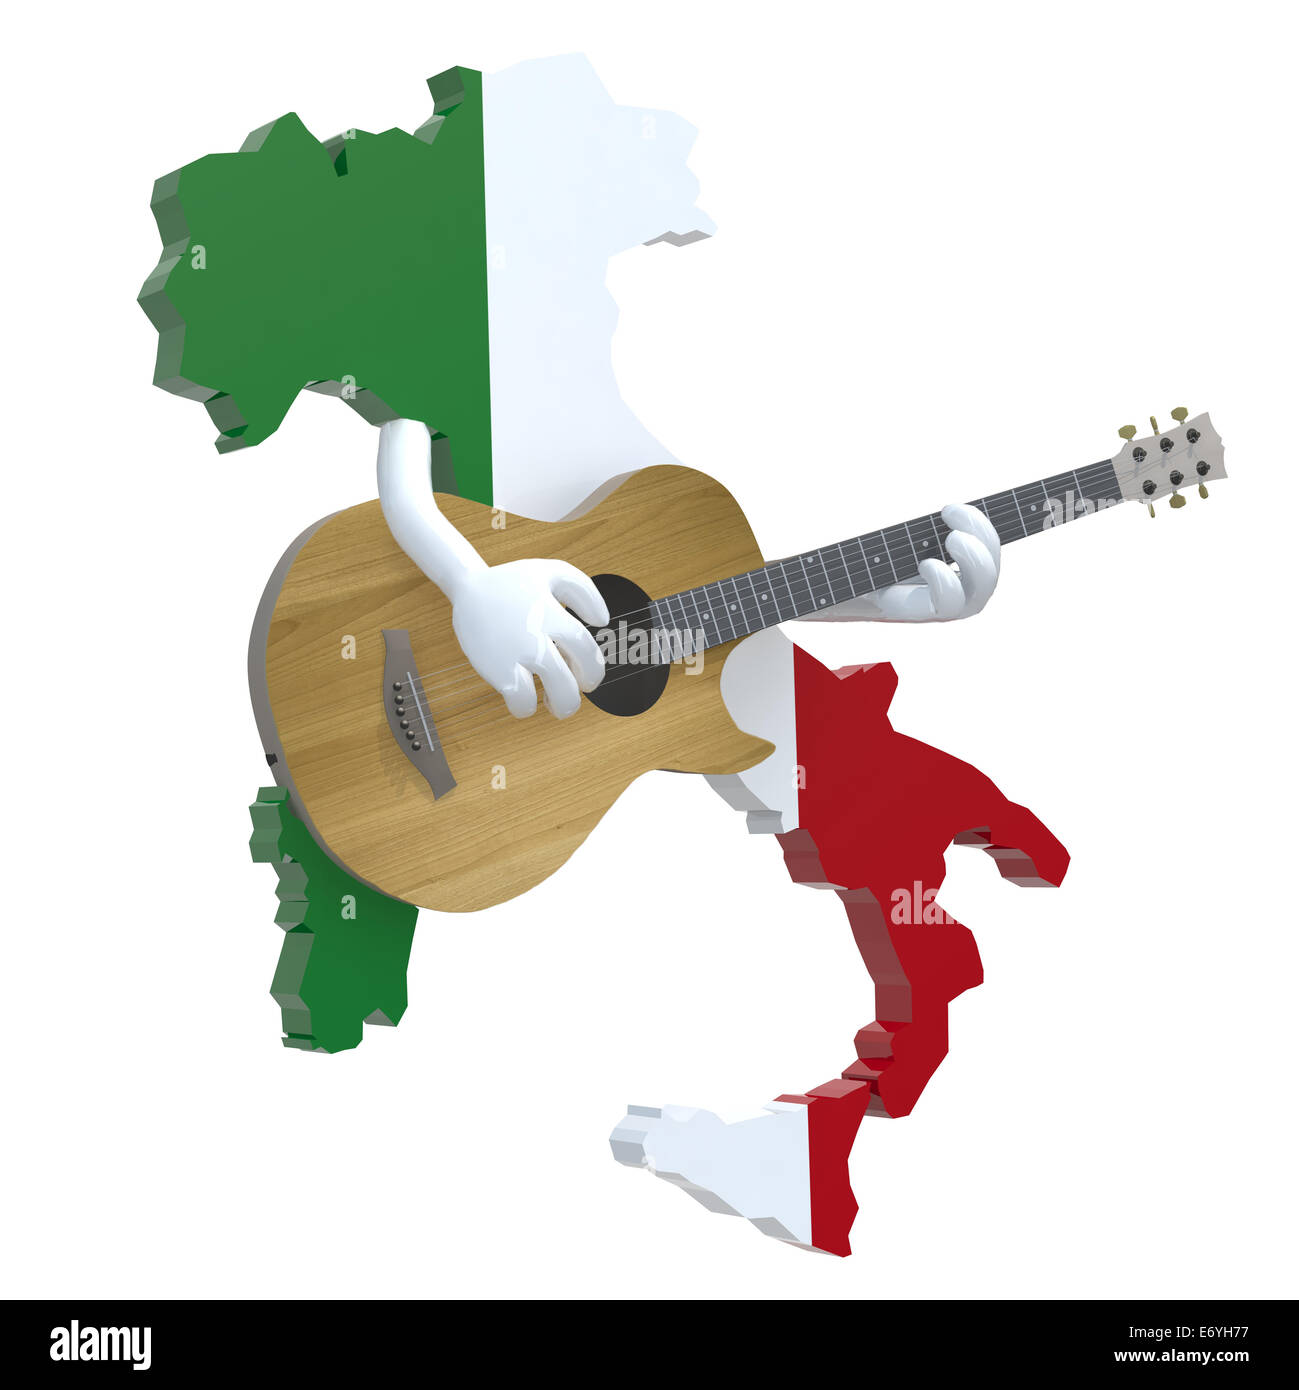 map of Italy with arms that play guitar, 3d illustration Stock Photo